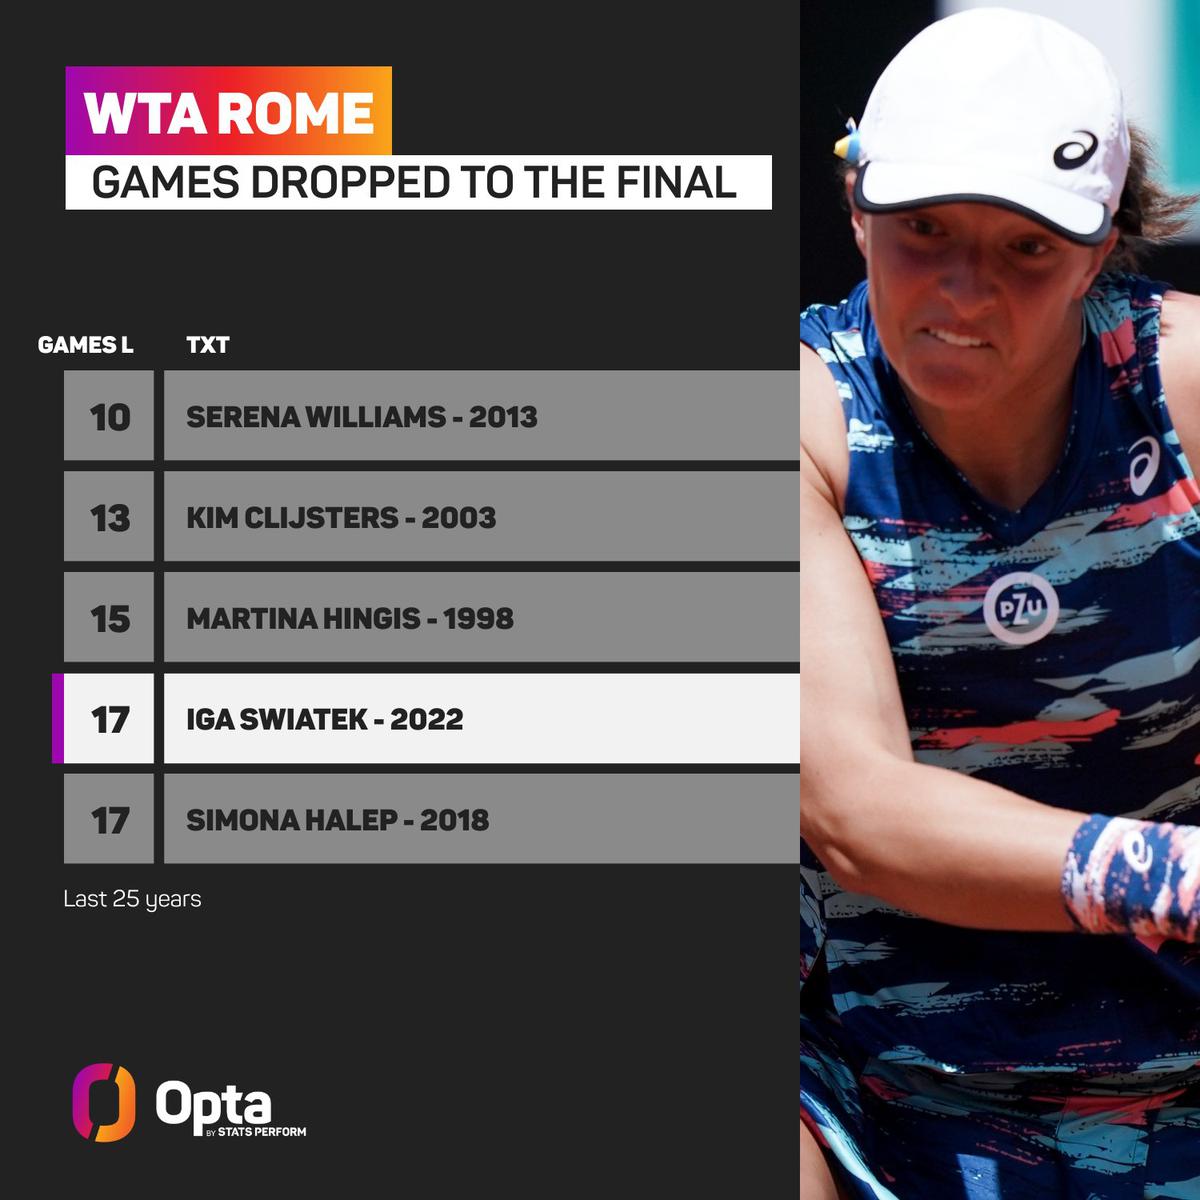 In the last 25 years, only Serena Williams in 2013, Kim Clijsters in 2003 and Martina Hingis in 1998 have reached the final in Rome with fewest games dropped than Iga Swiatek in 2022 (17). 